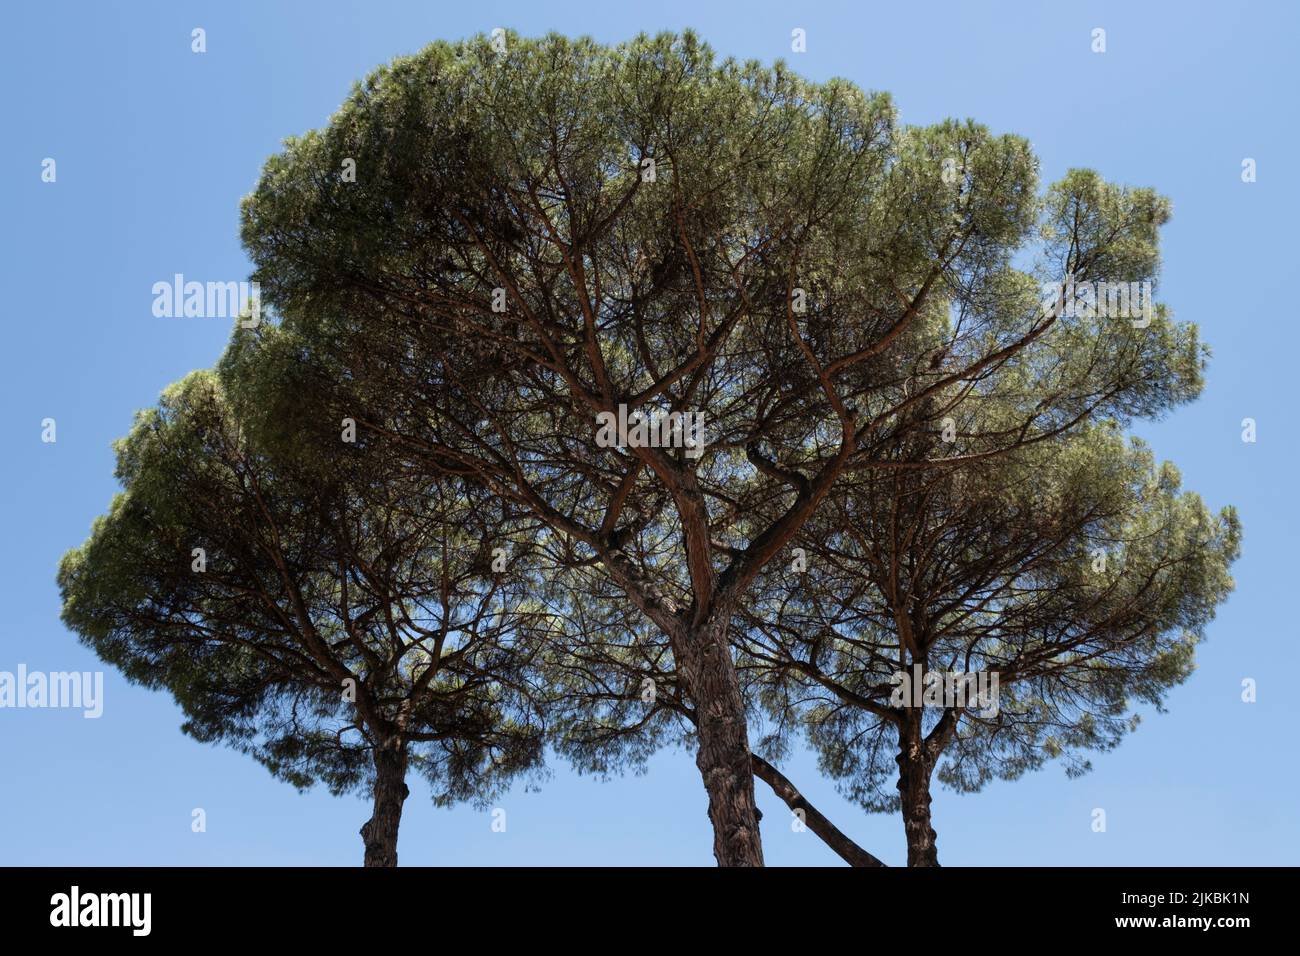 Iconic umbrella or parasol pine trees or Pinus Pinea with tall and skinny trunks supporting widespread canopies of needles high in the air in Rome Stock Photo